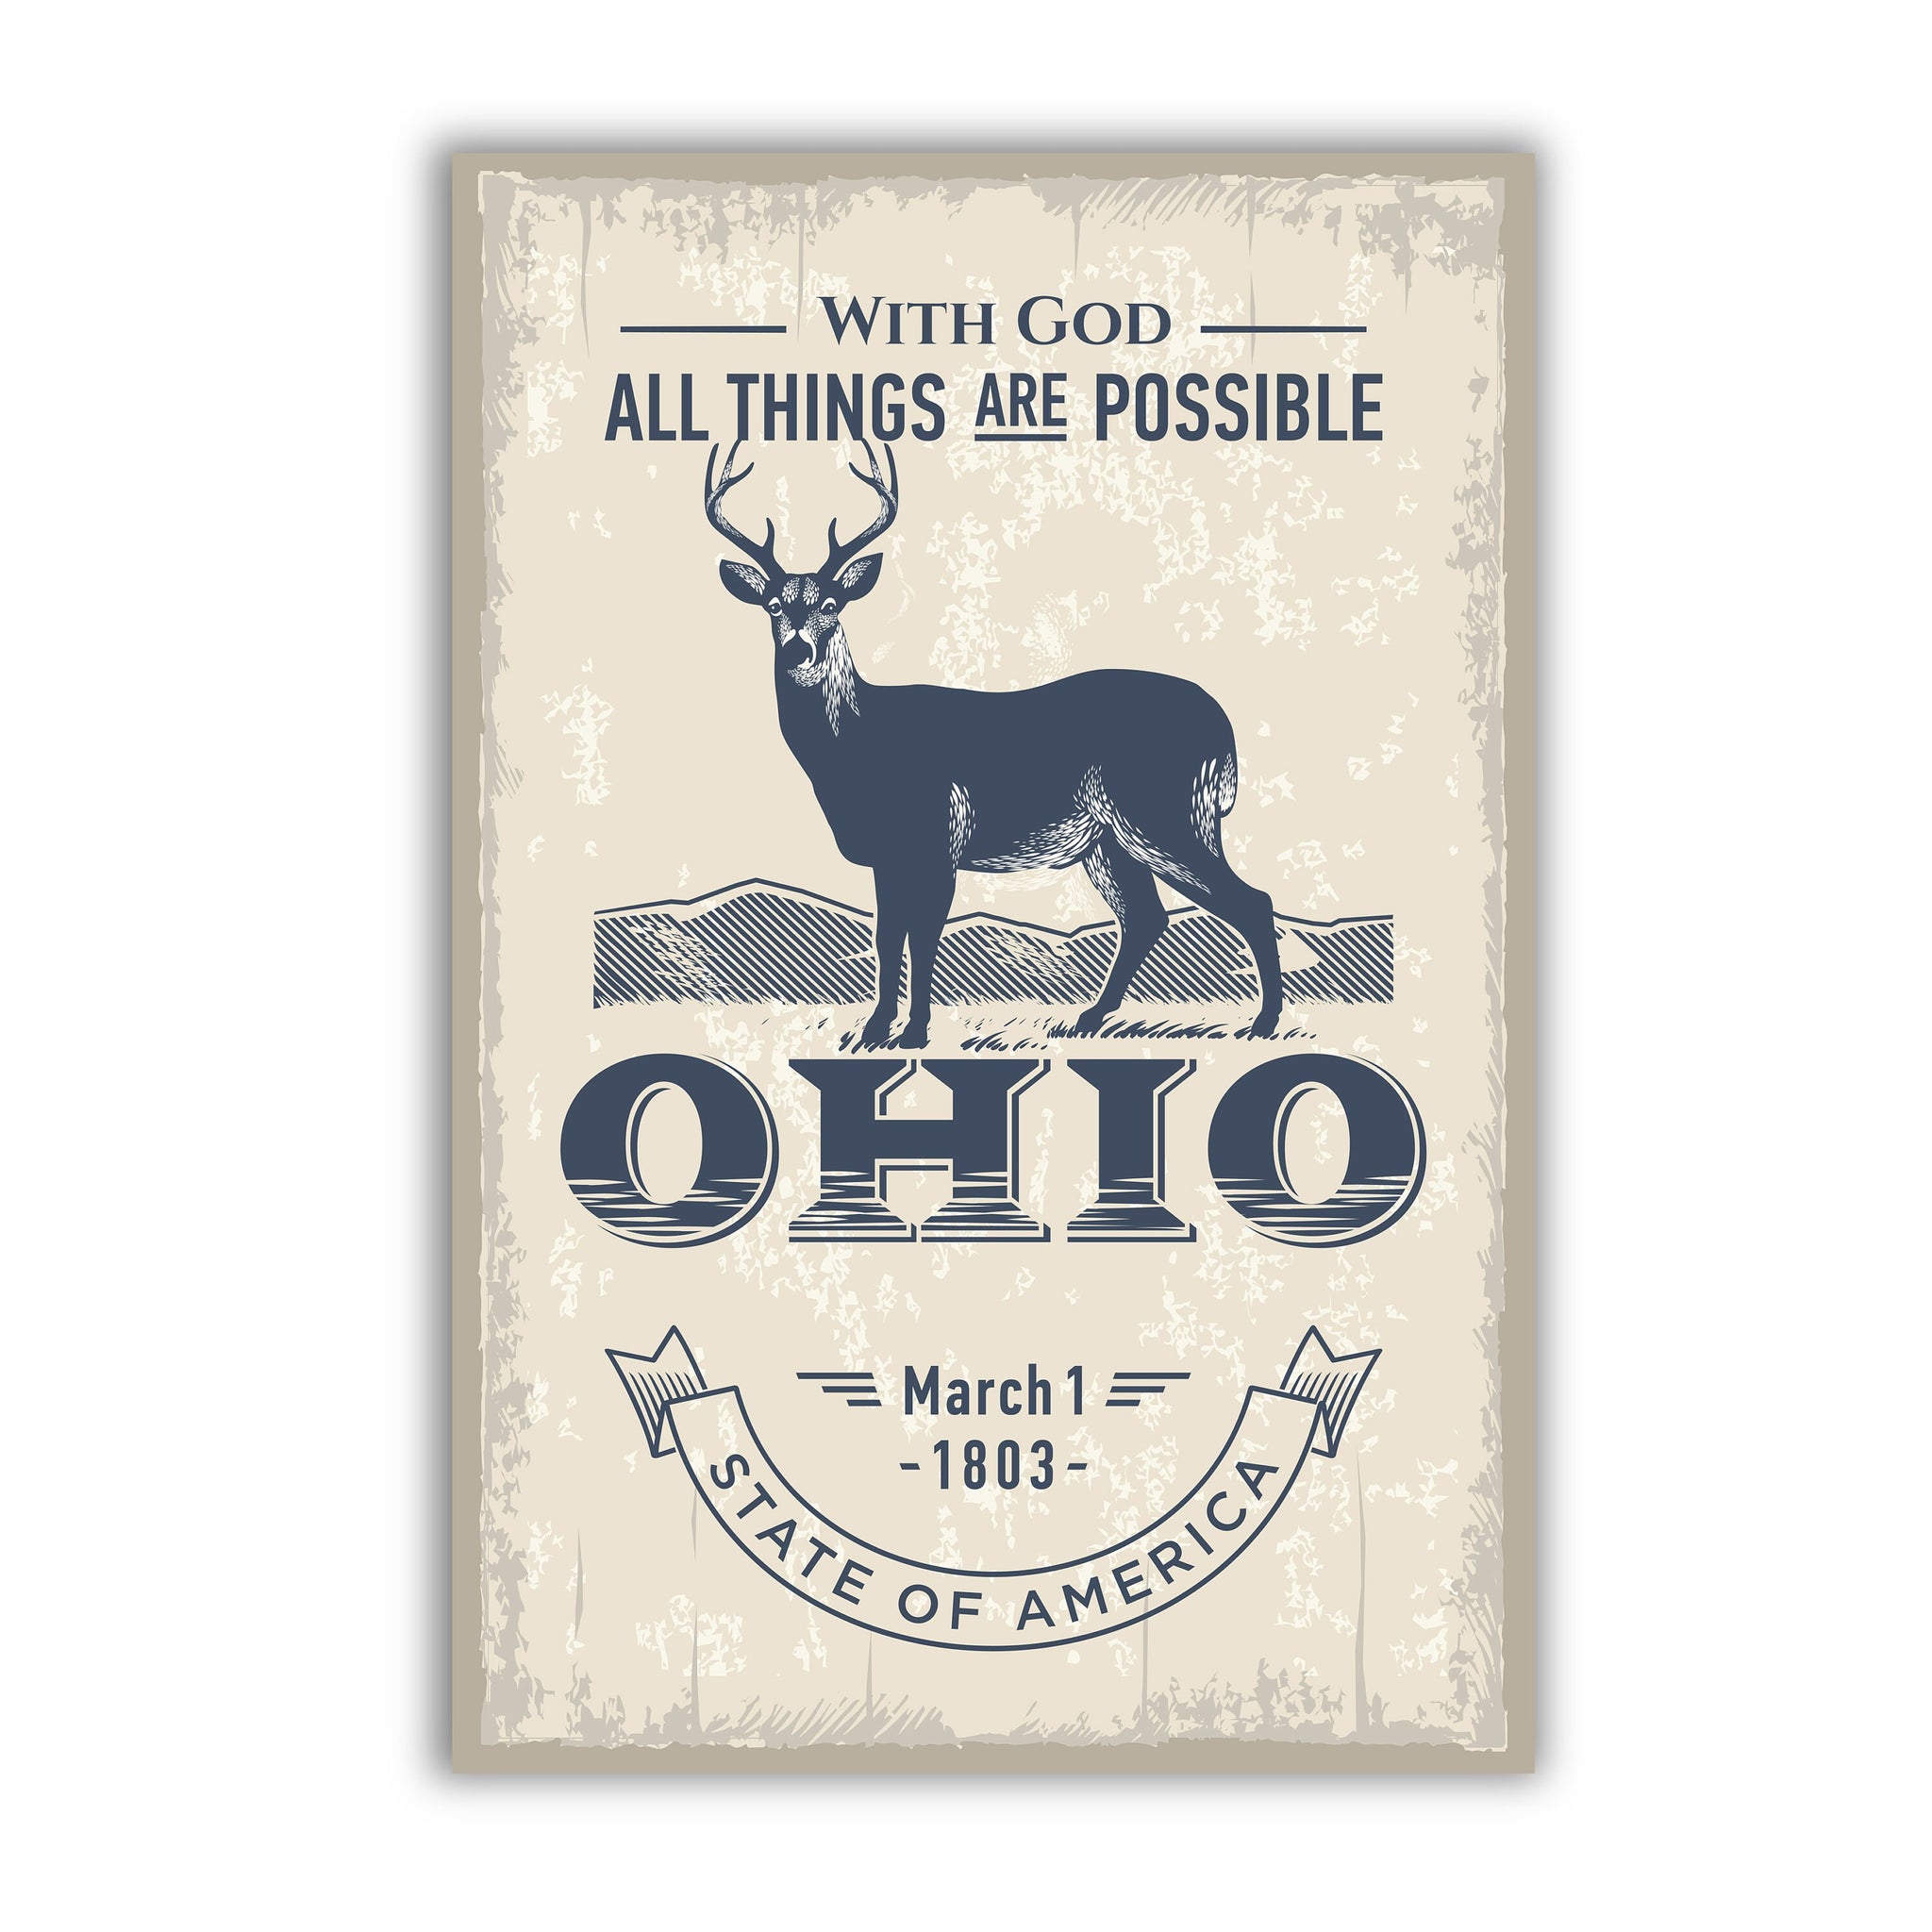 Ohio State Symbol Poster, Ohio State Poster Print, Ohio State Emblem Poster, Retro Travel State Poster, Home and Office Wall Art